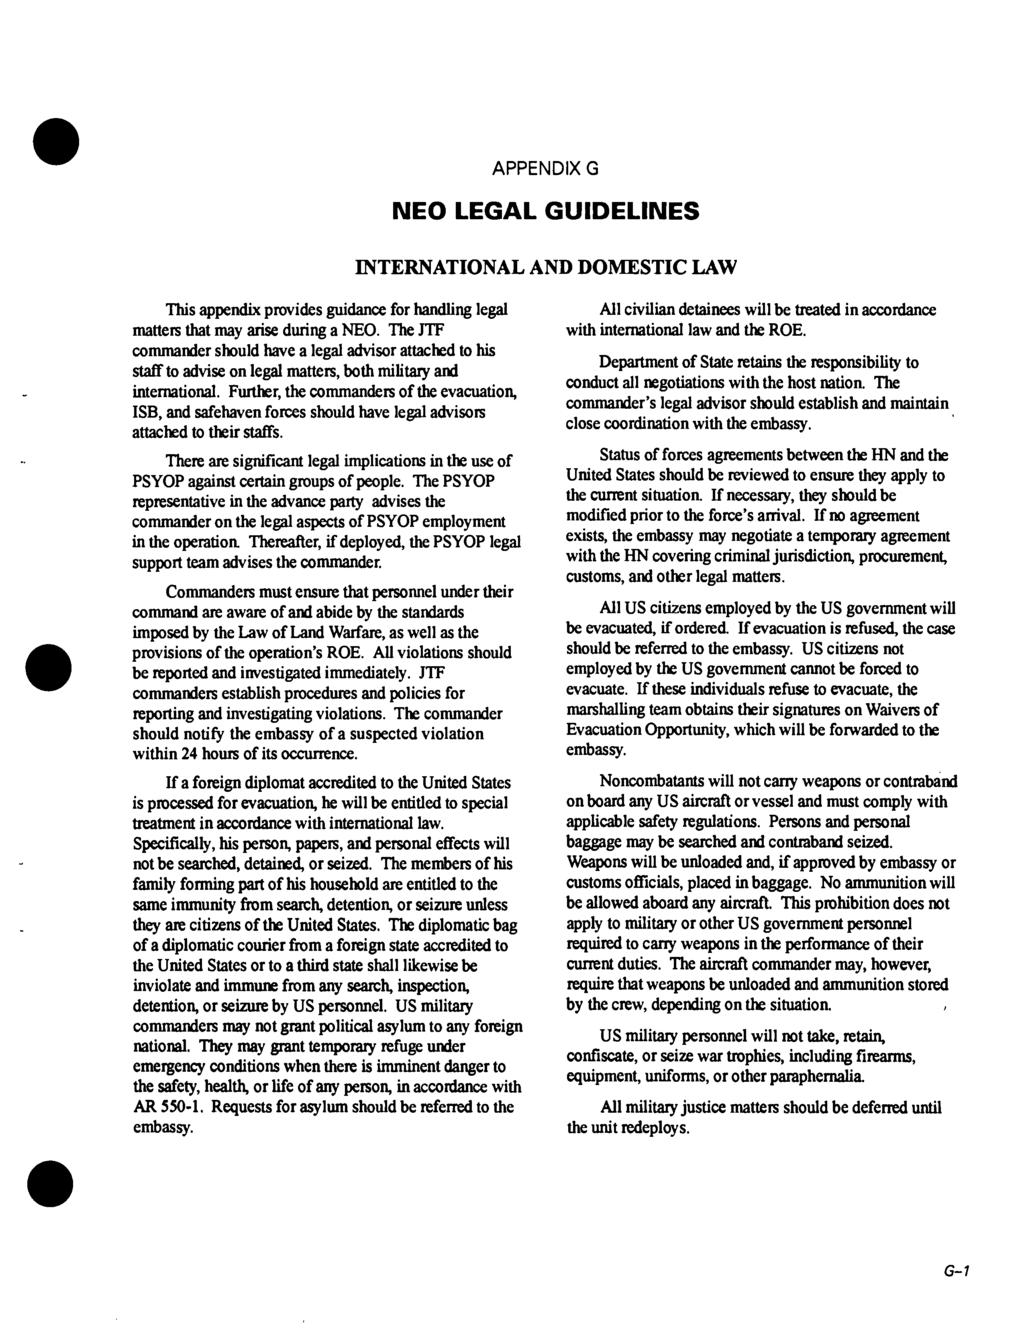 APPENDIX G NEO LEGAL GUIDELINES INTERNATIONAL AND DOMESTIC LAW This appendix provides guidance for handling legal matters that may arise during a NEO.